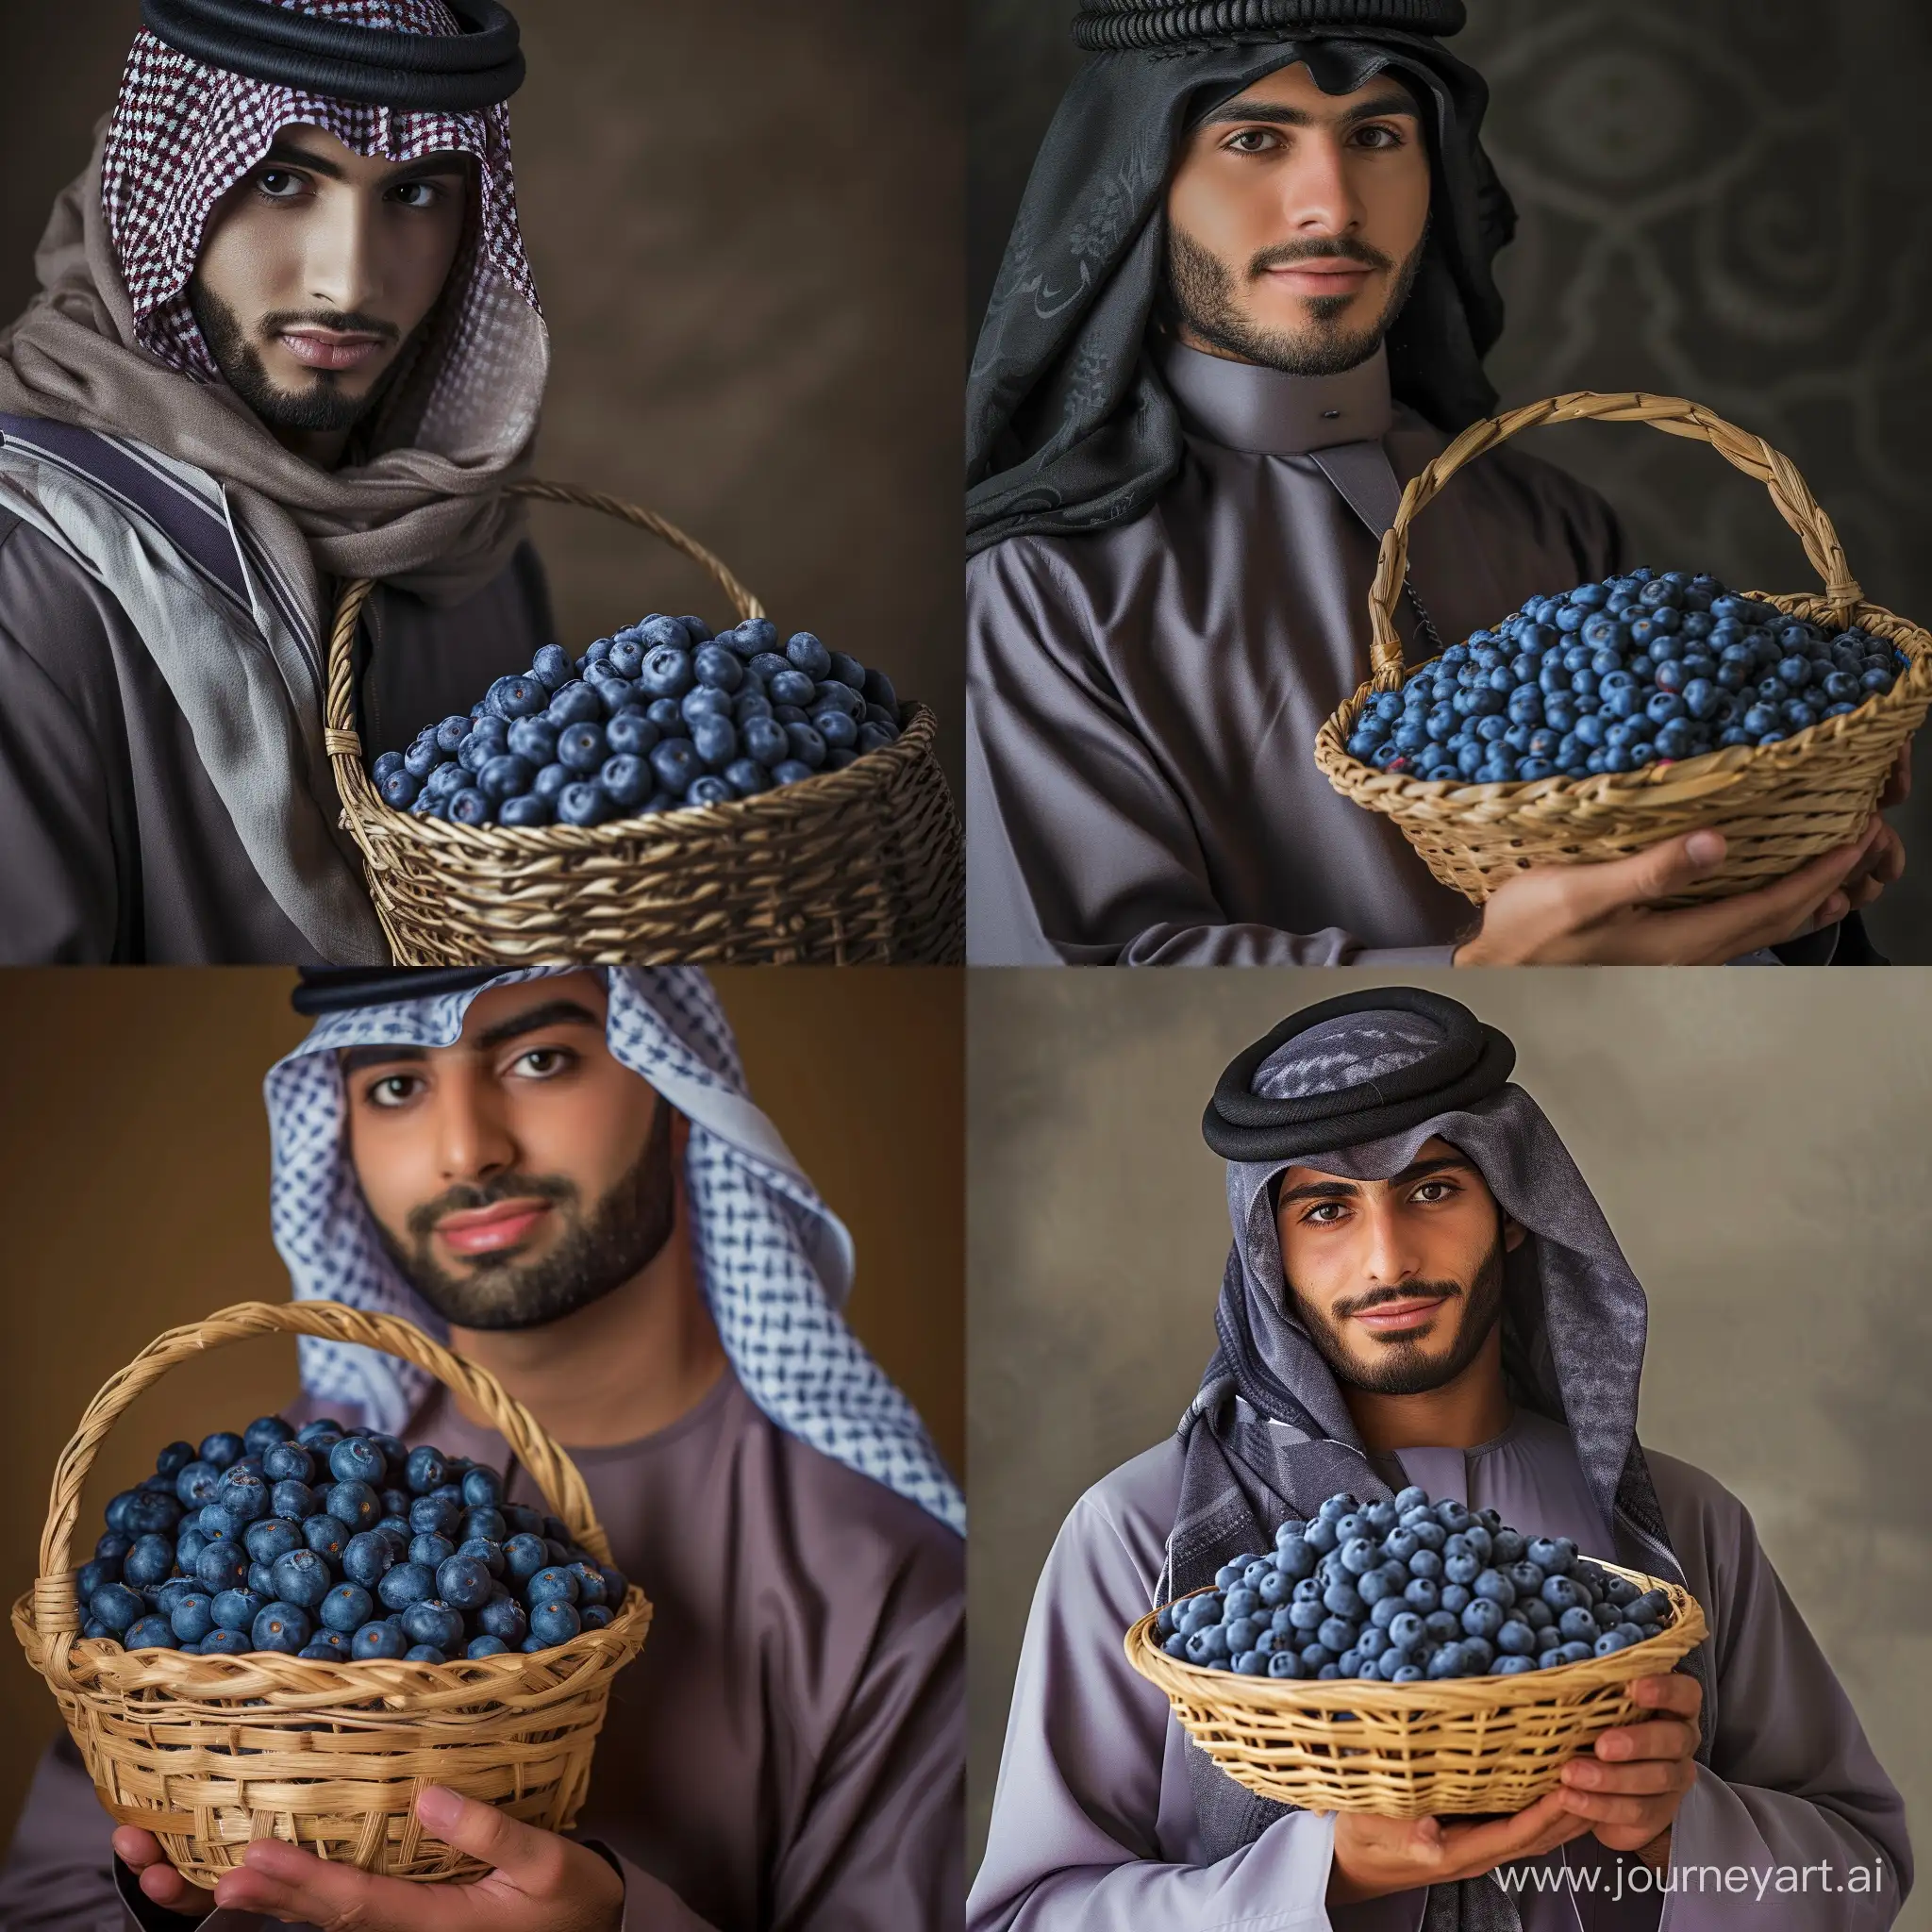 Real and natural photo of a man in Arabic dress holding a basket of blueberries. Full details of a basket of blueberries and a young man's face. The blueberry basket is in the middle of the picture.